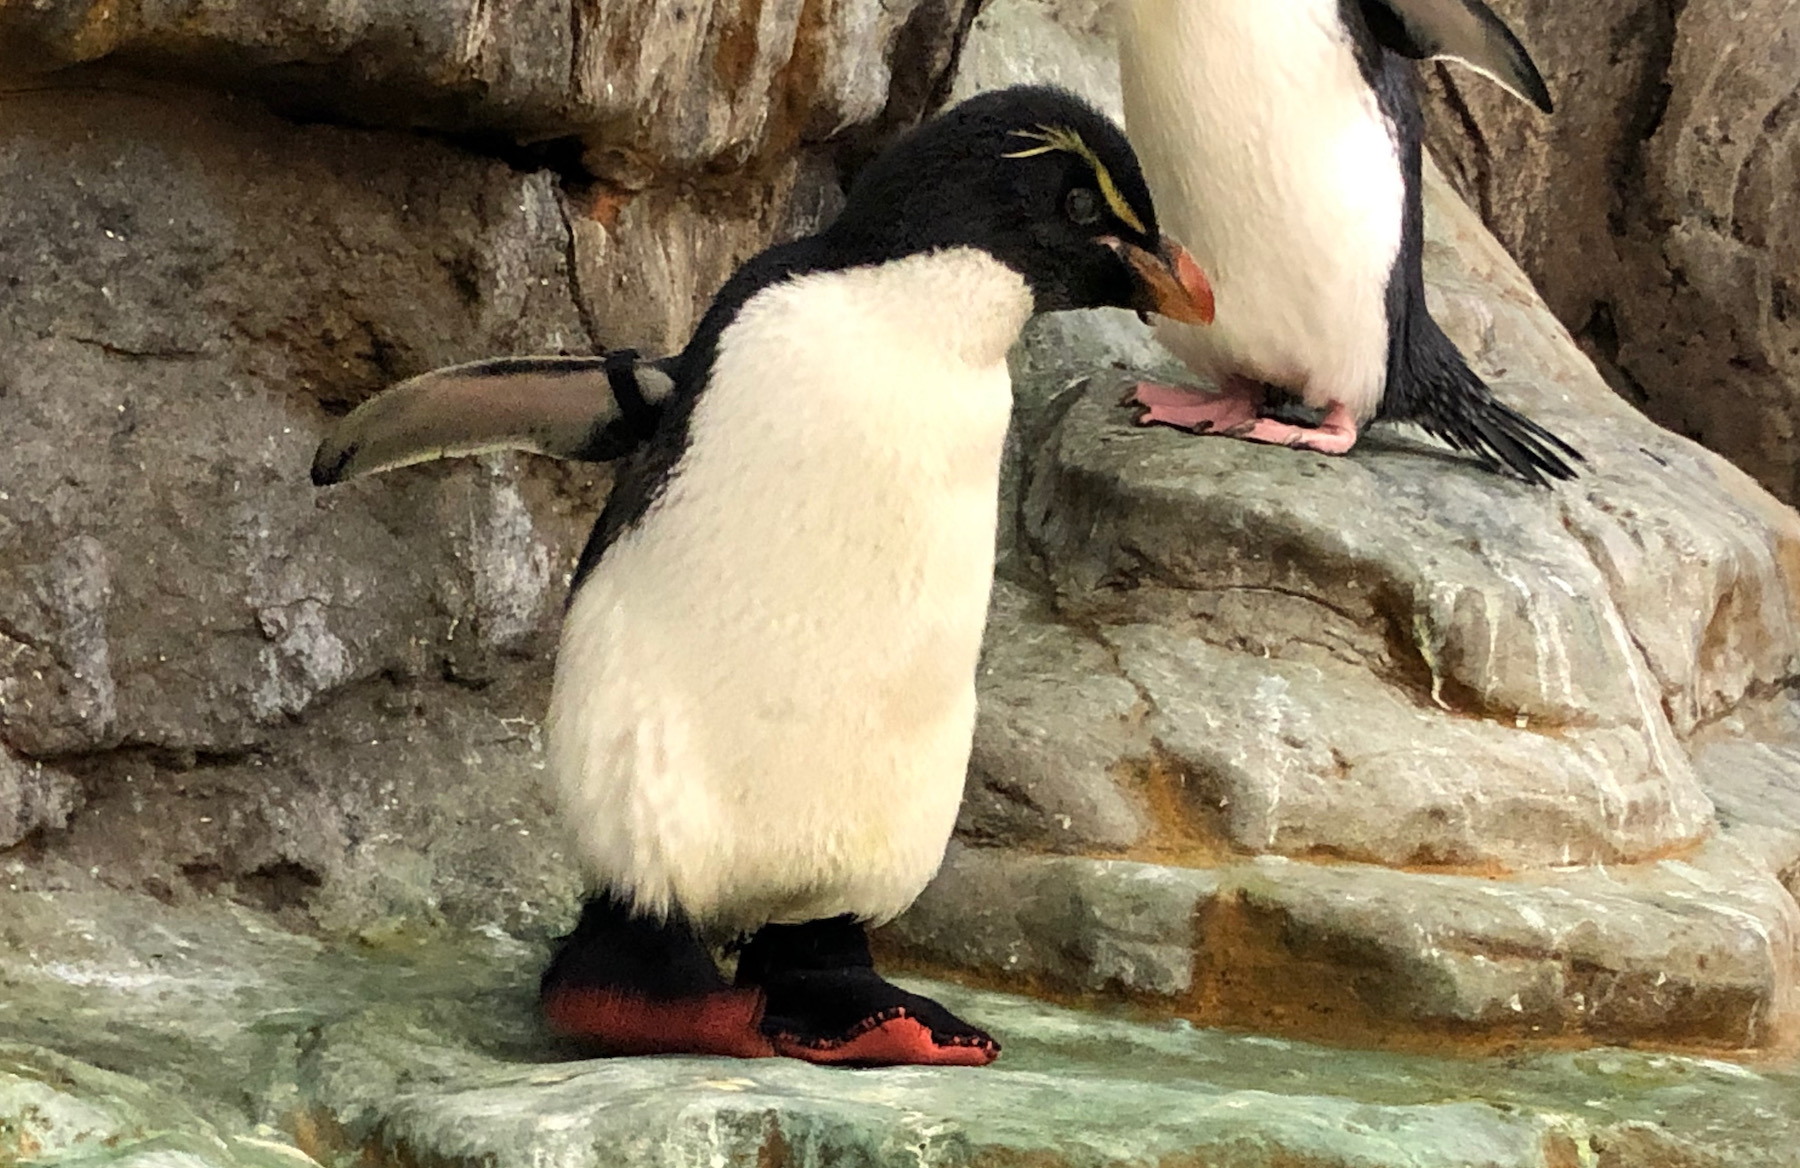 The Penguin Who Wears Shoes